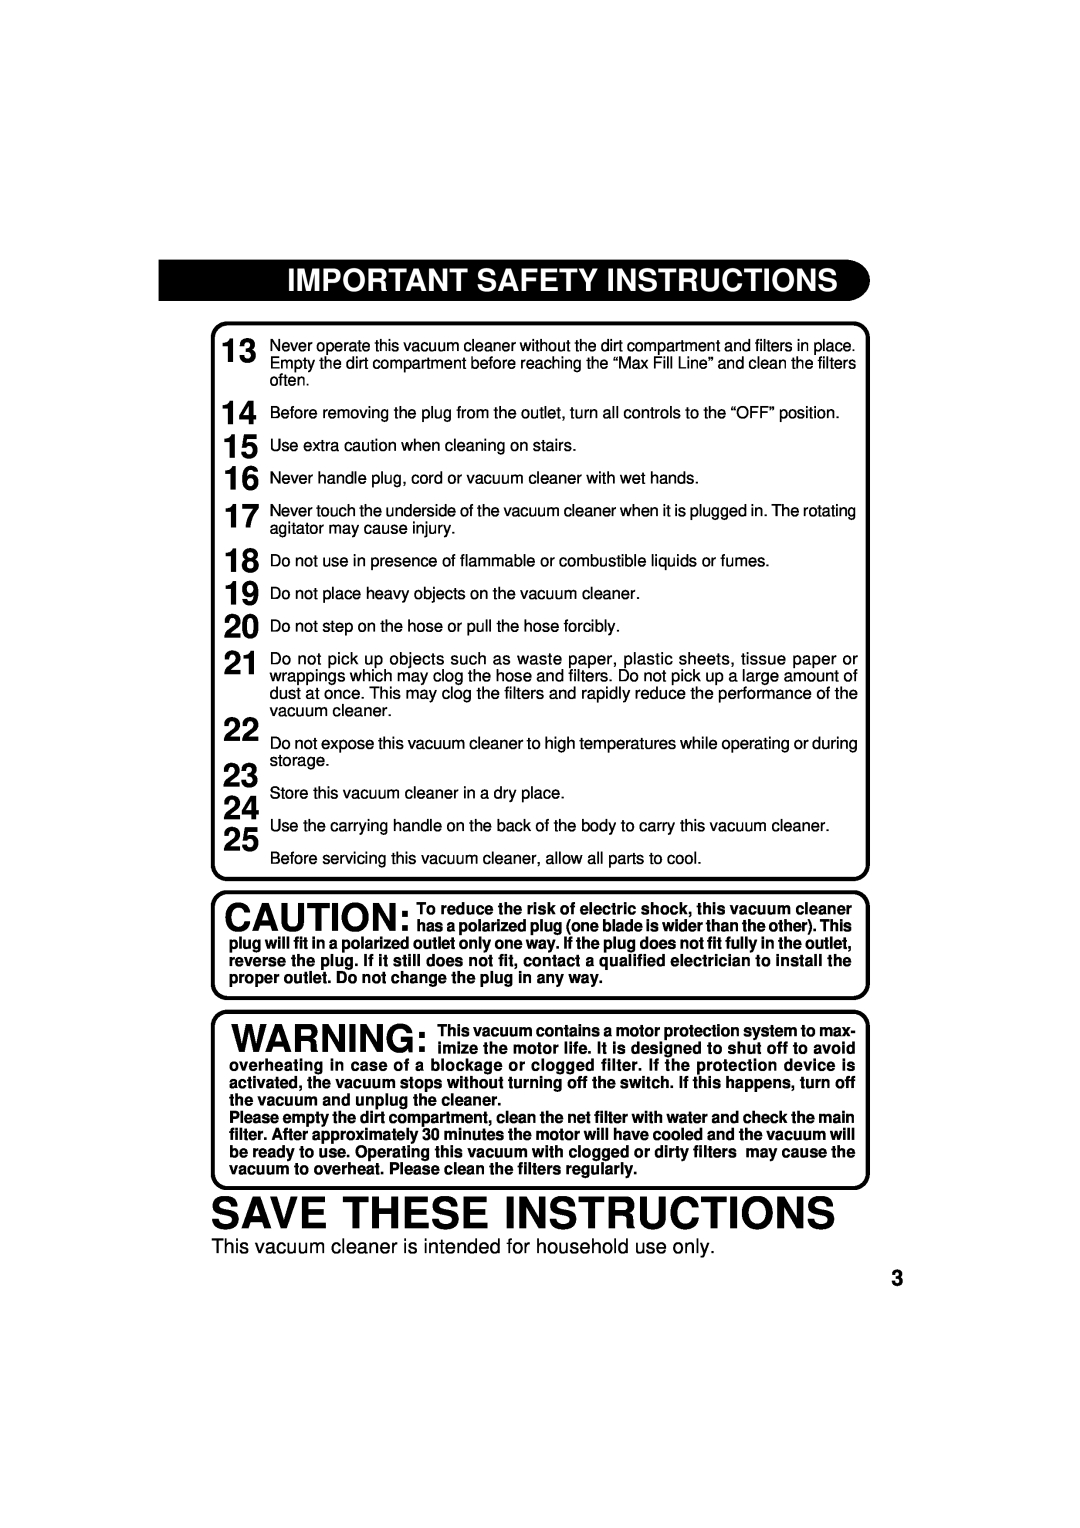 Sharp EC-T5180B, EC-T5180A, EC-S5170 operation manual Save These Instructions, Important Safety Instructions 